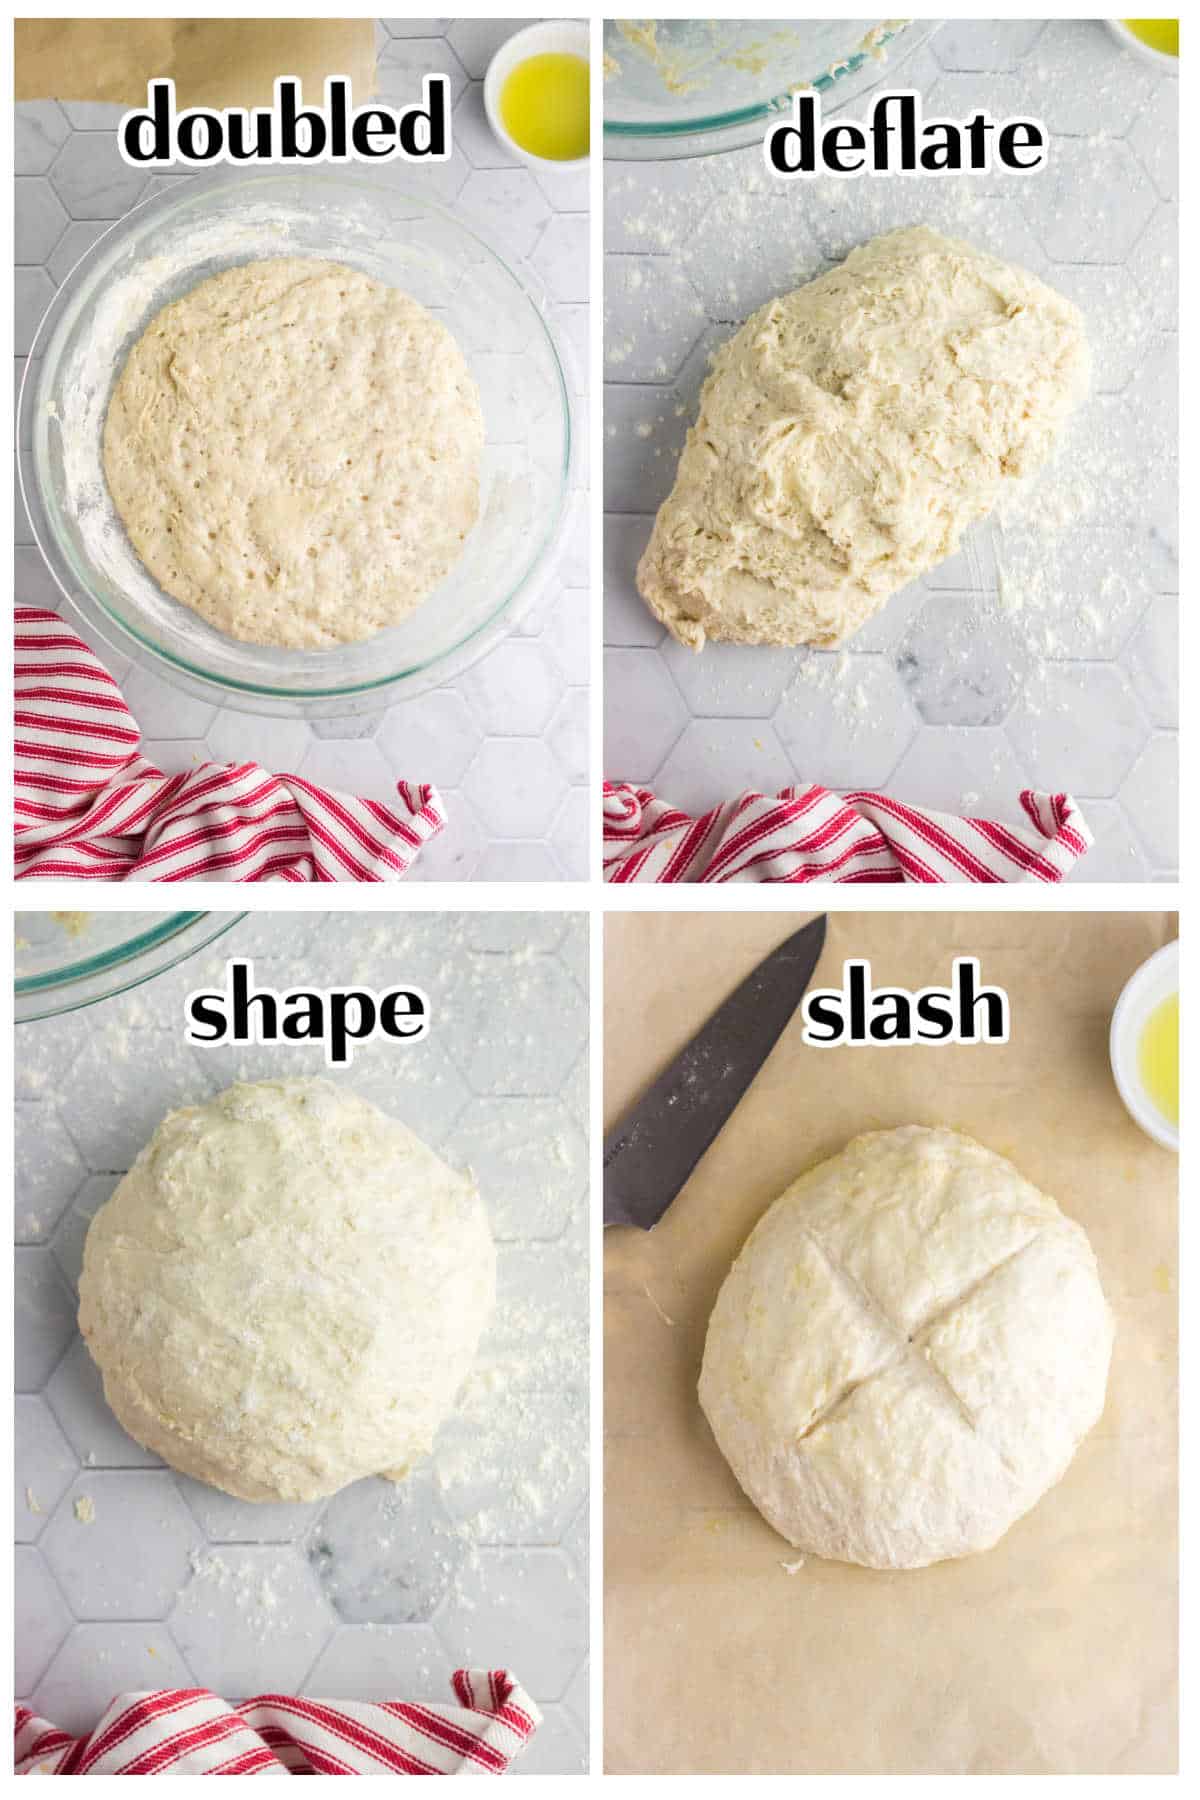 Four images with text overlay showing how to form and make bread.